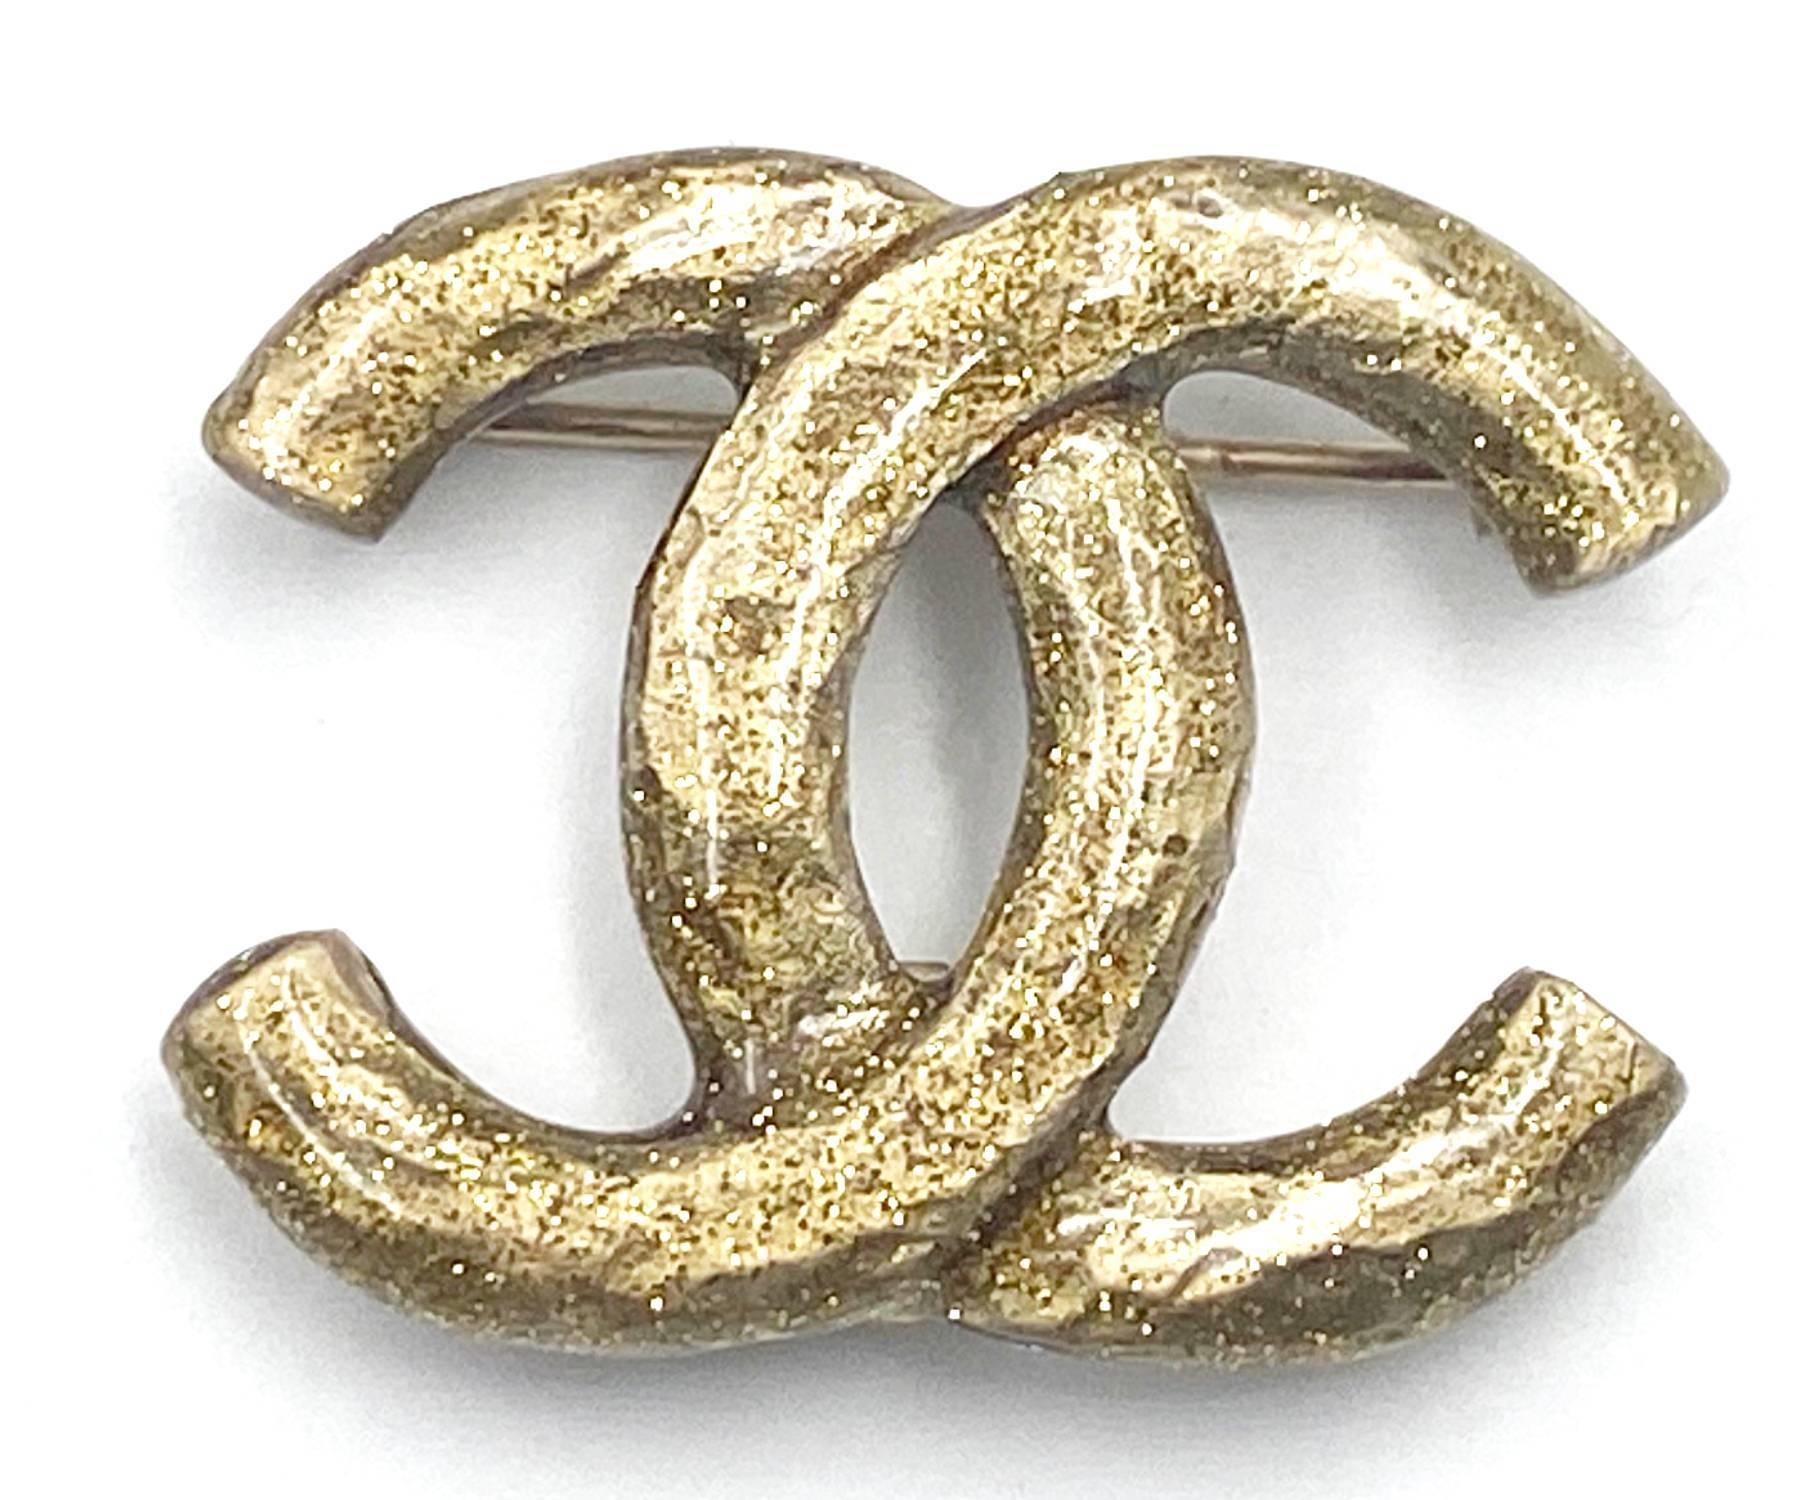 Chanel Gold CC Glitter Pendant Small Brooch

*Marked 05
*Made in Italy

-Approximately 1